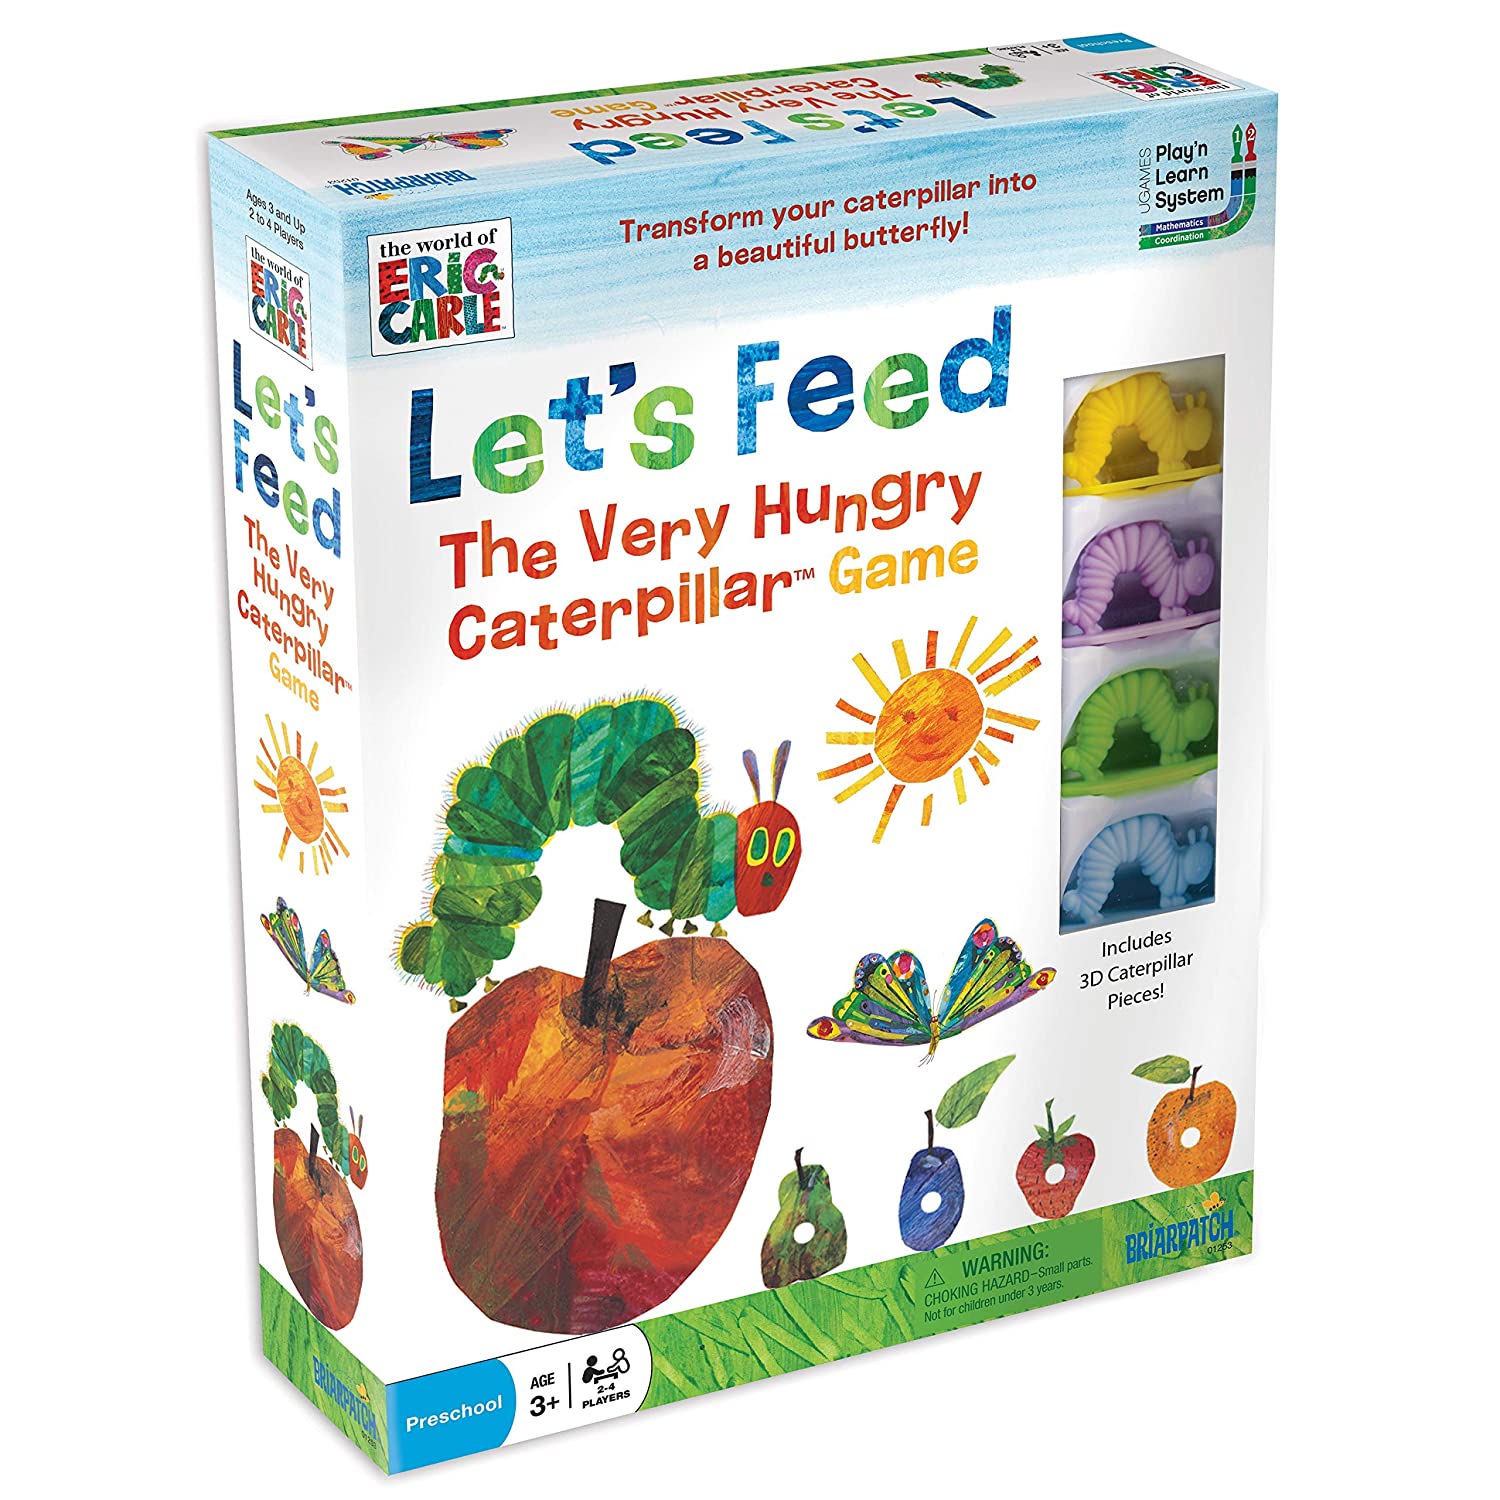 The World of Eric Carle Let's Feed The Very Hungry Caterpillar Game